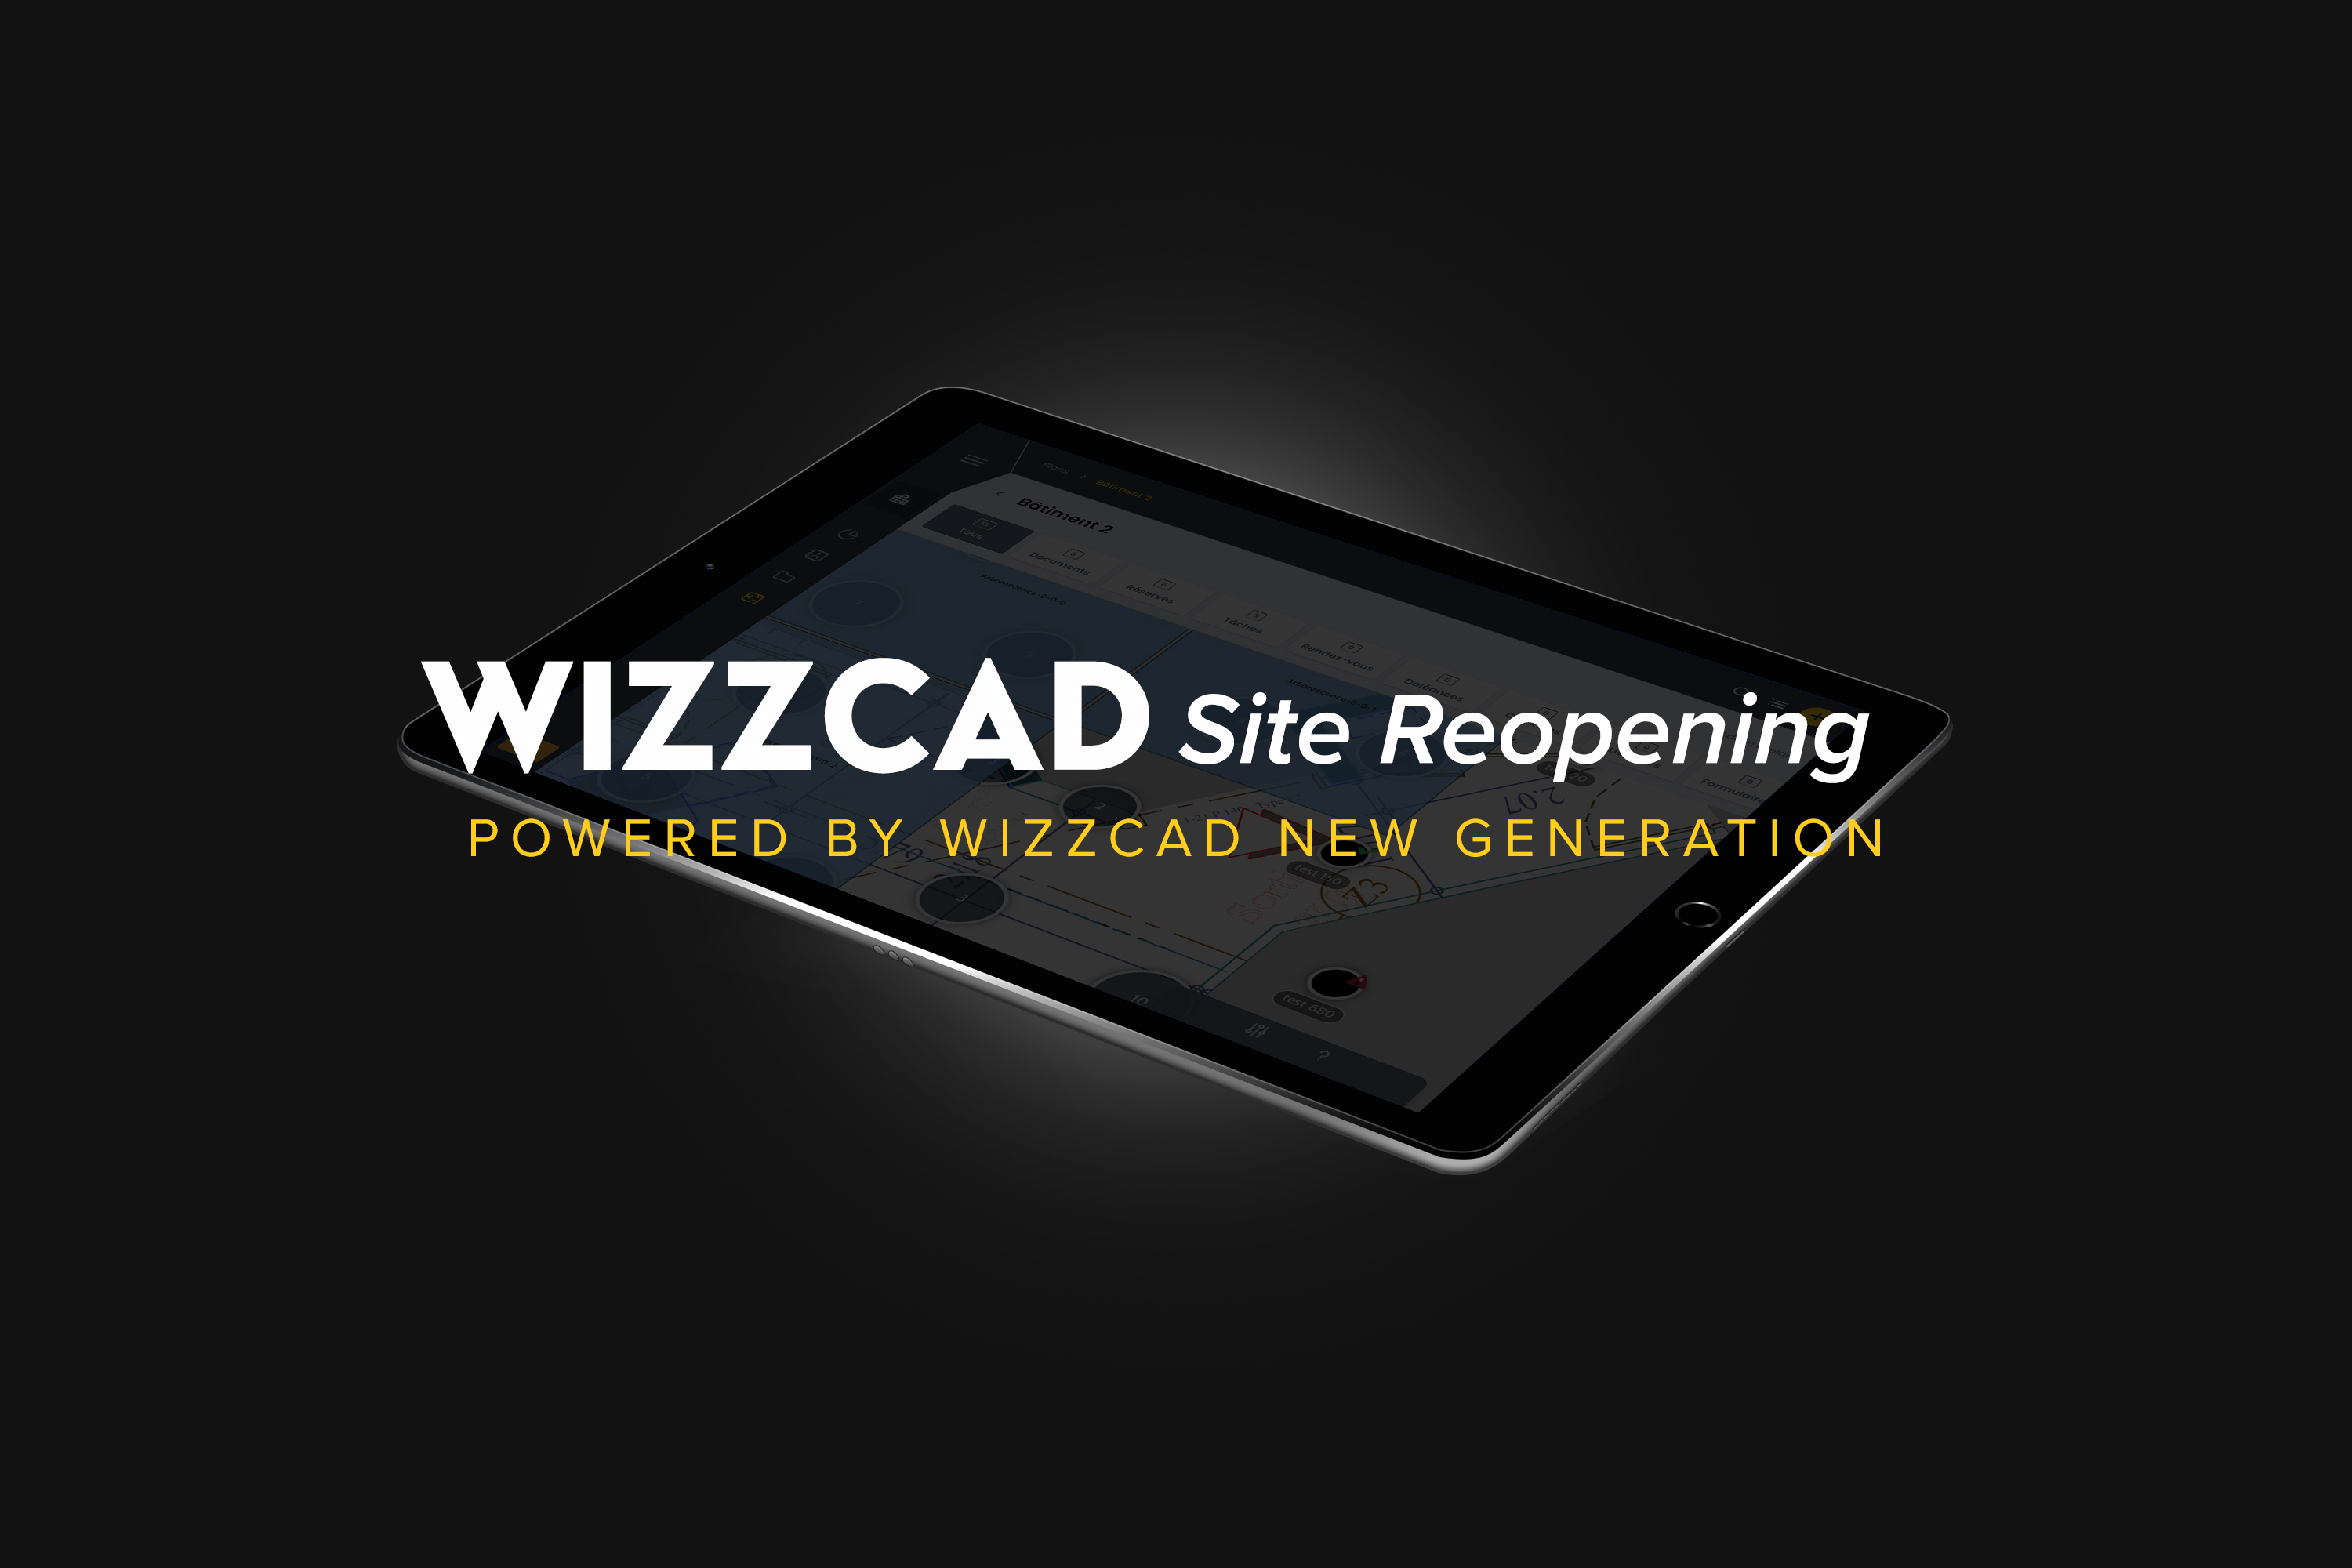 WIZZCAD - Site reopening